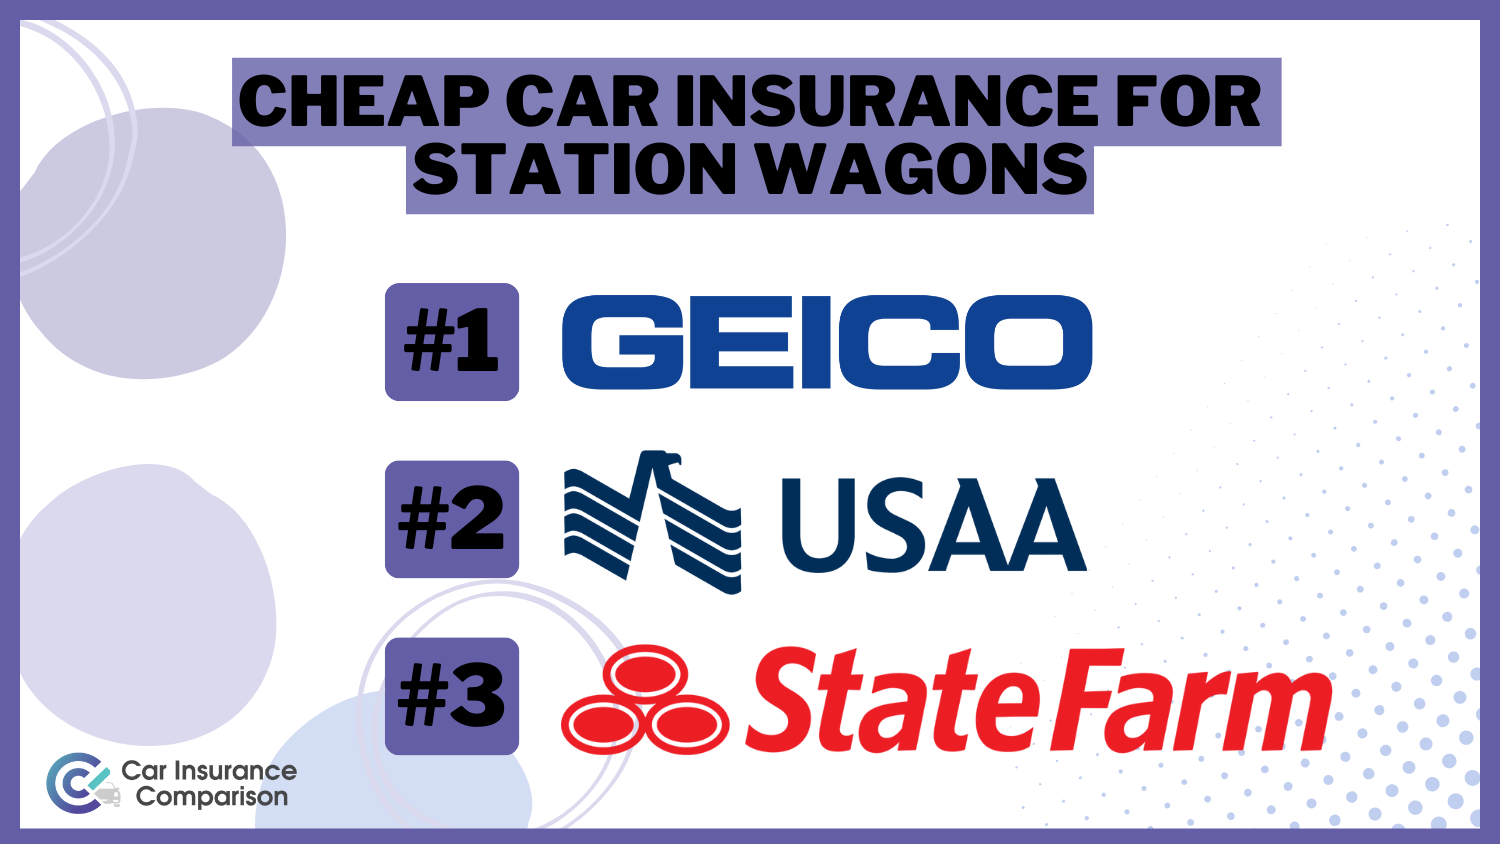 Cheap Car Insurance For Station Wagons - Geico, USAA, State Farm